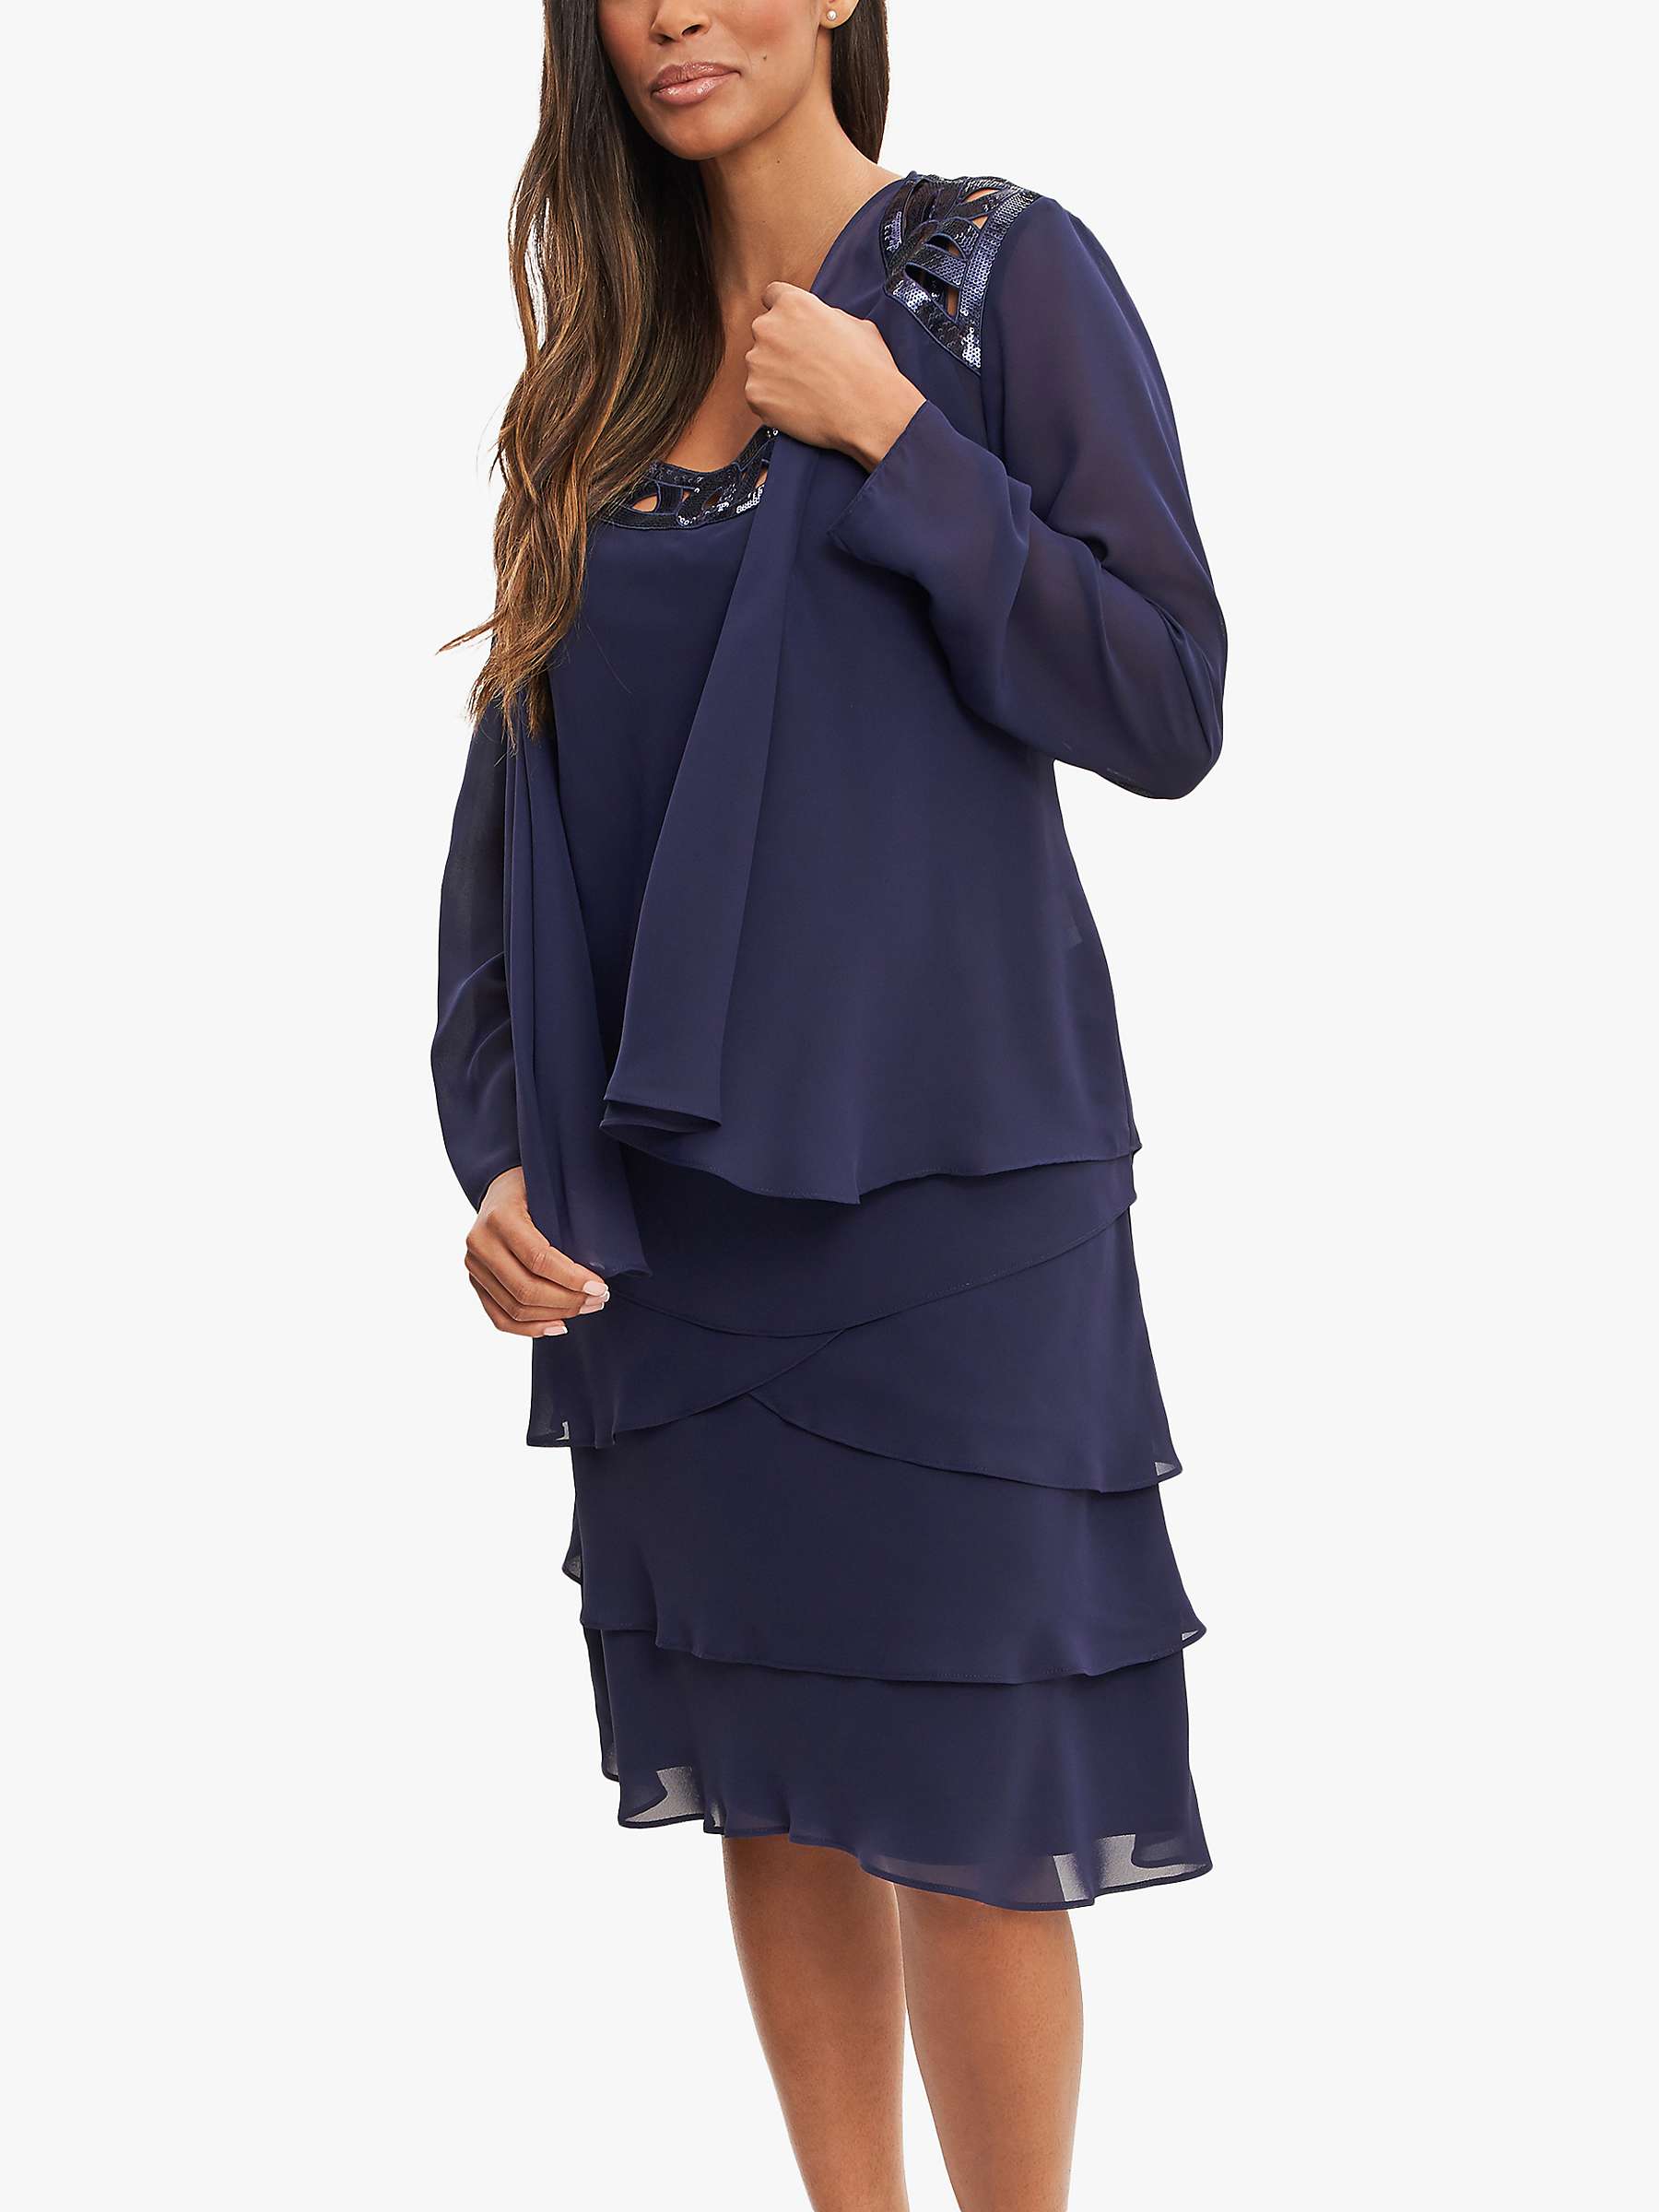 Buy Gina Bacconi Leigh Embellished Tiered Dress and Jacket, Navy Online at johnlewis.com